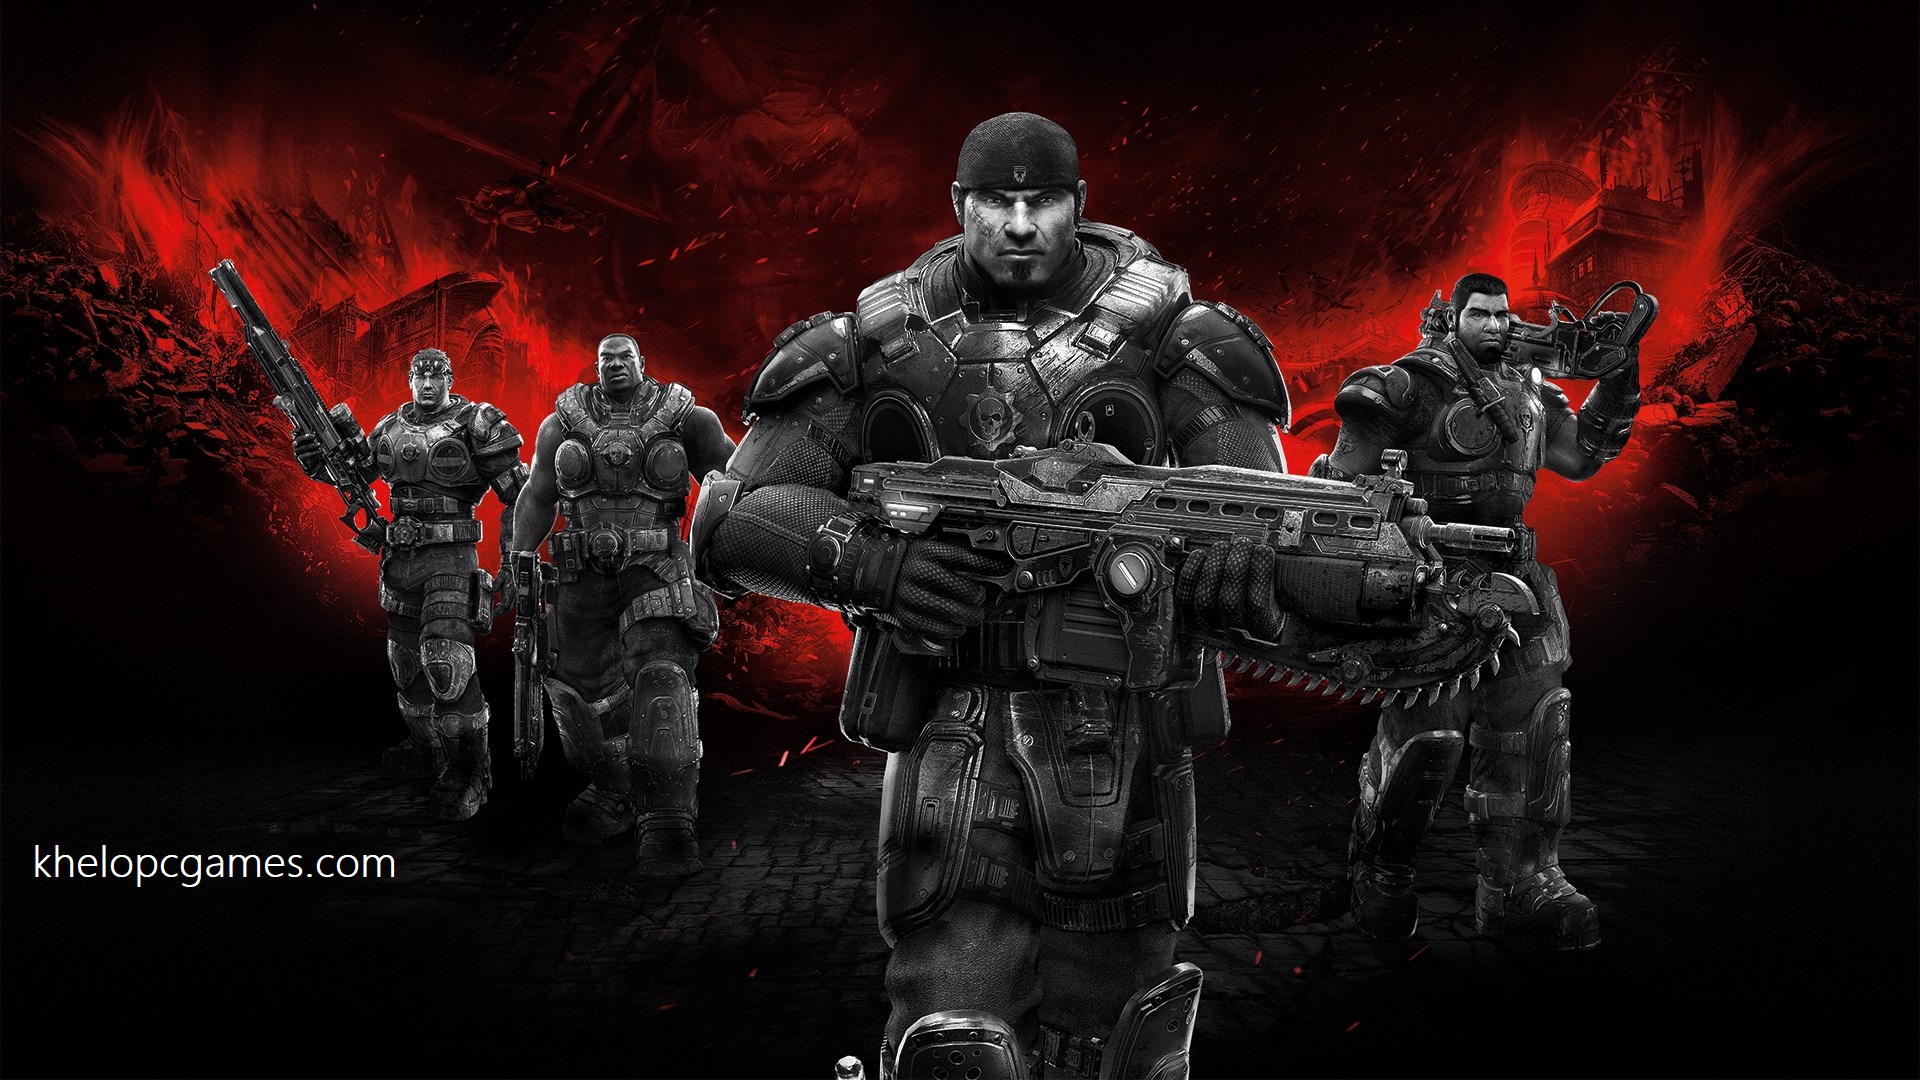 Gears of War Free Download Full Version PC Game Highly Compressed